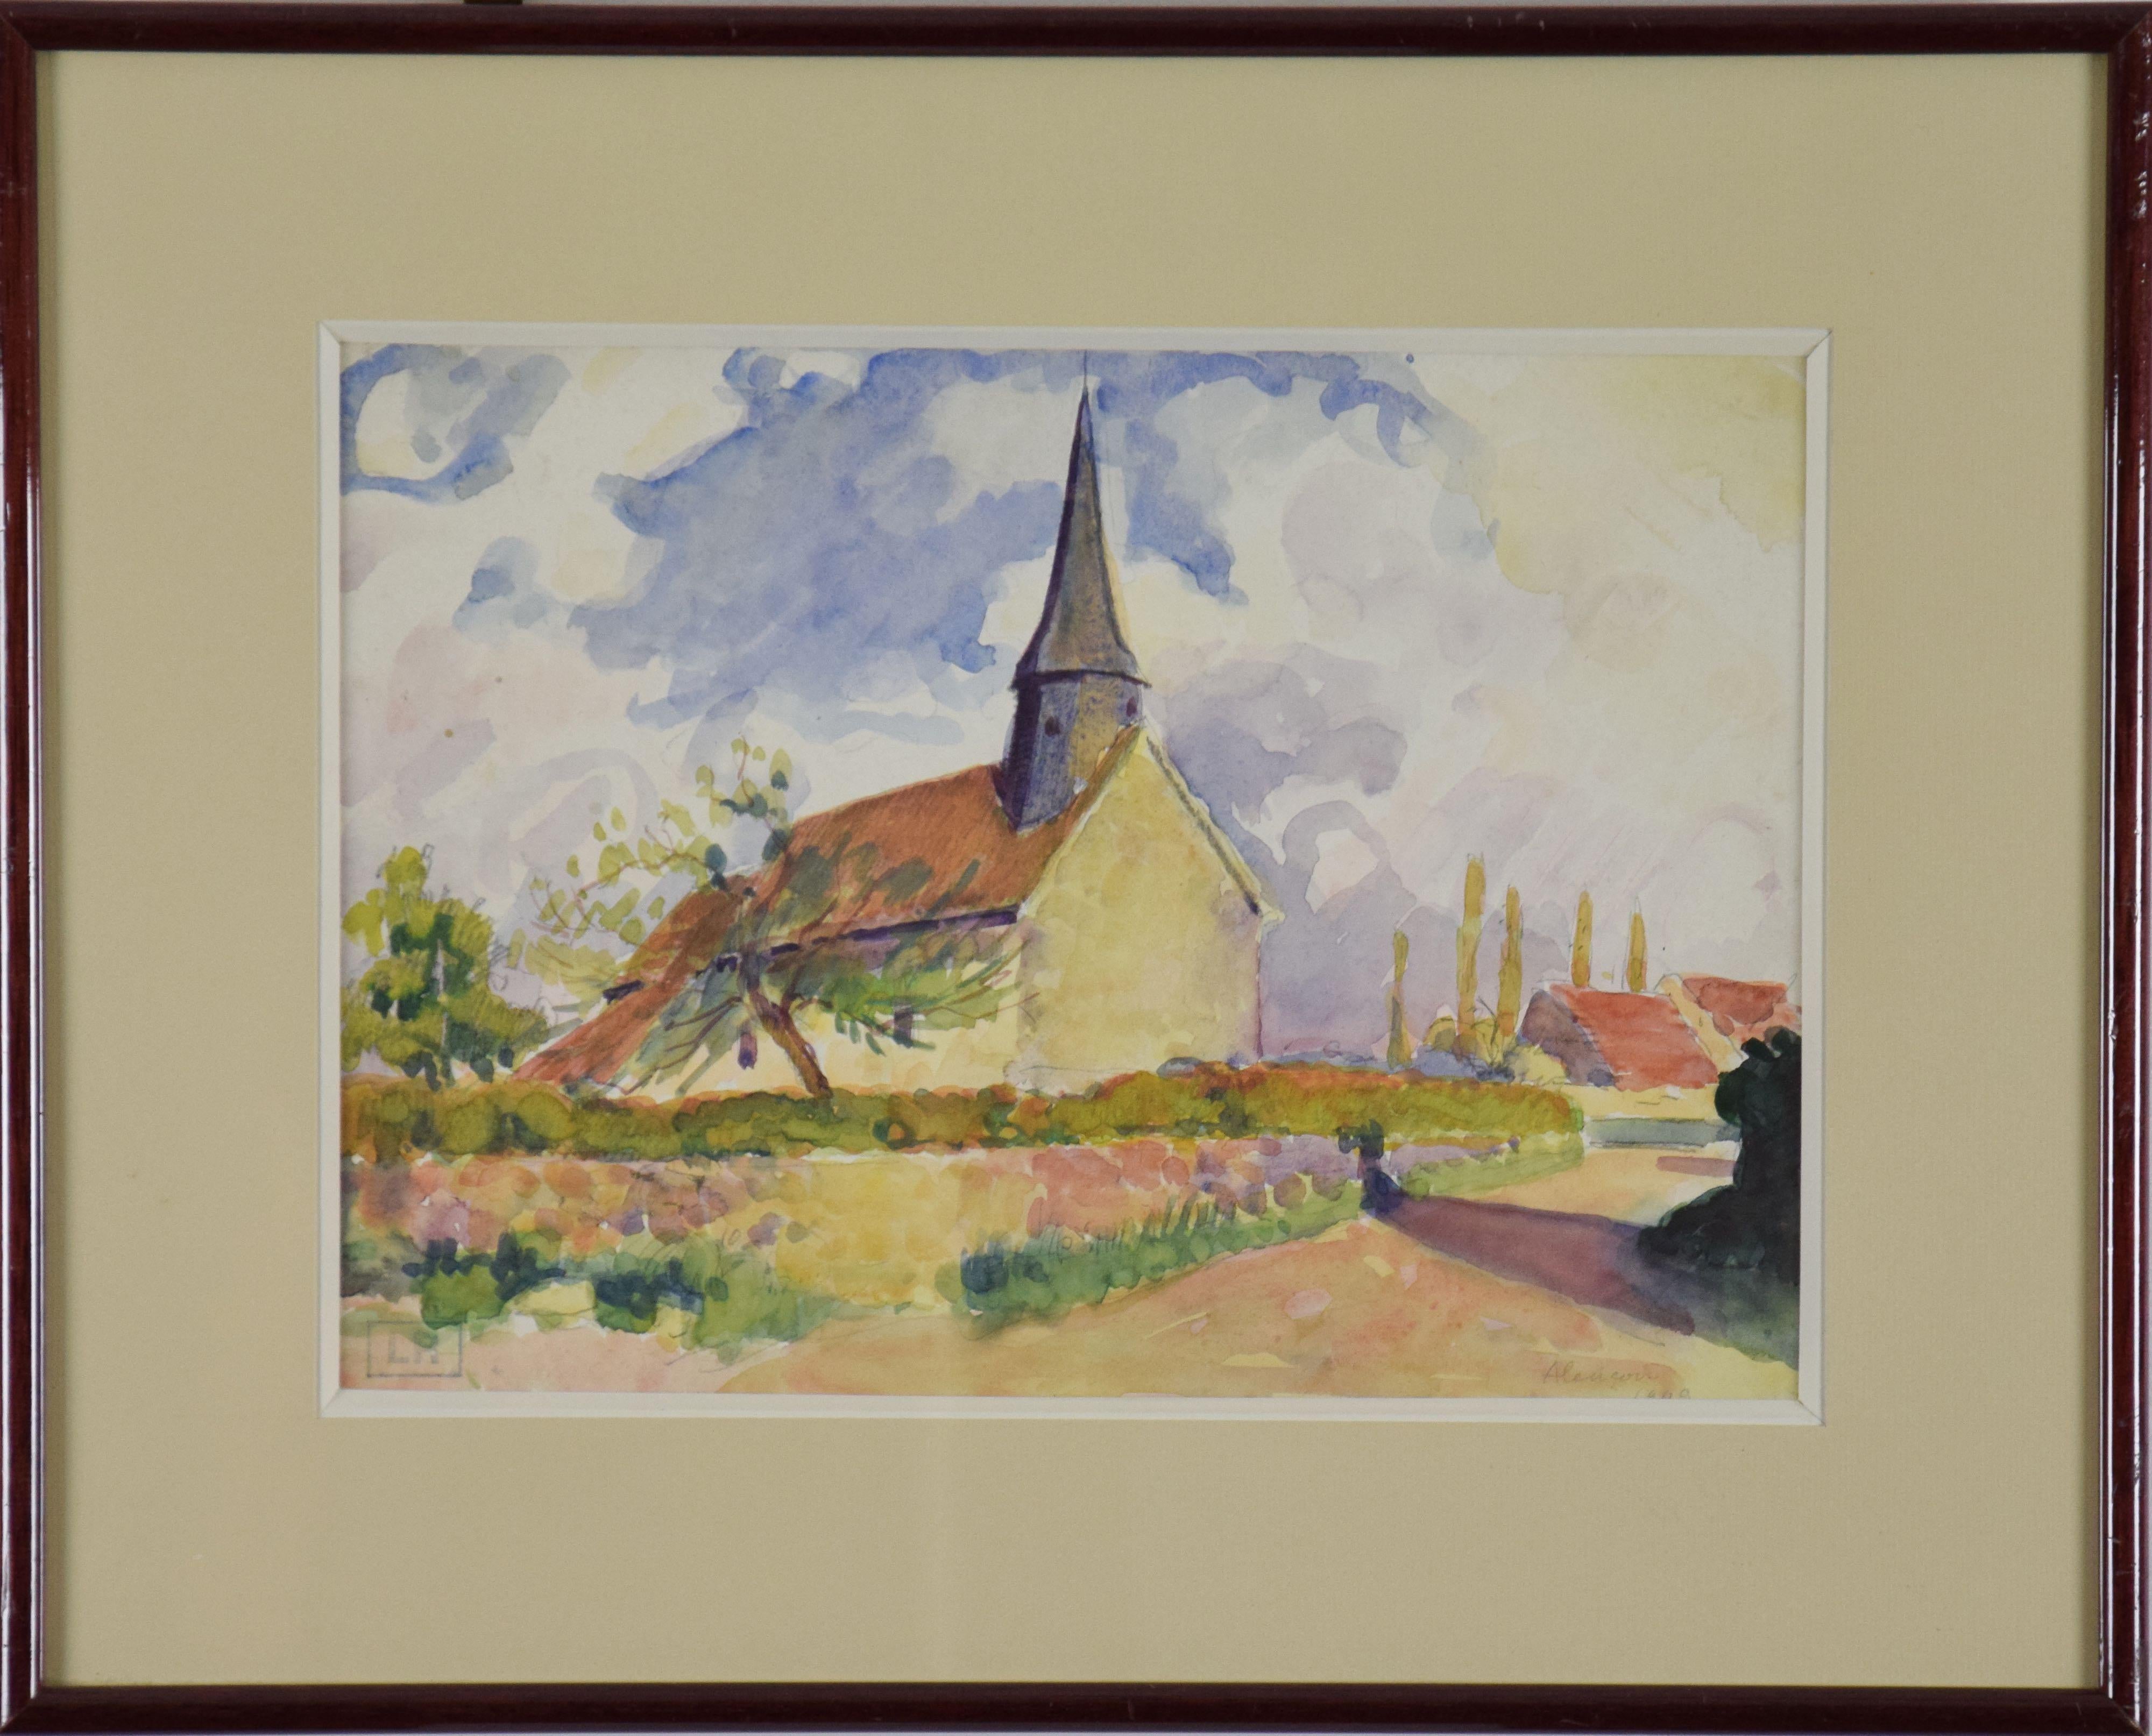 *UK BUYERS WILL PAY AN ADDITIONAL 20% VAT ON TOP OF THE ABOVE PRICE

Alençon by Ludovic-Rodo Pissarro (1878-1952)
Watercolour on paper
22 x 31 cm (8 ⁵/₈ x 12 ¹/₄ inches)
Signed with Estate stamp lower left, LR
Inscribed and dated lower right,